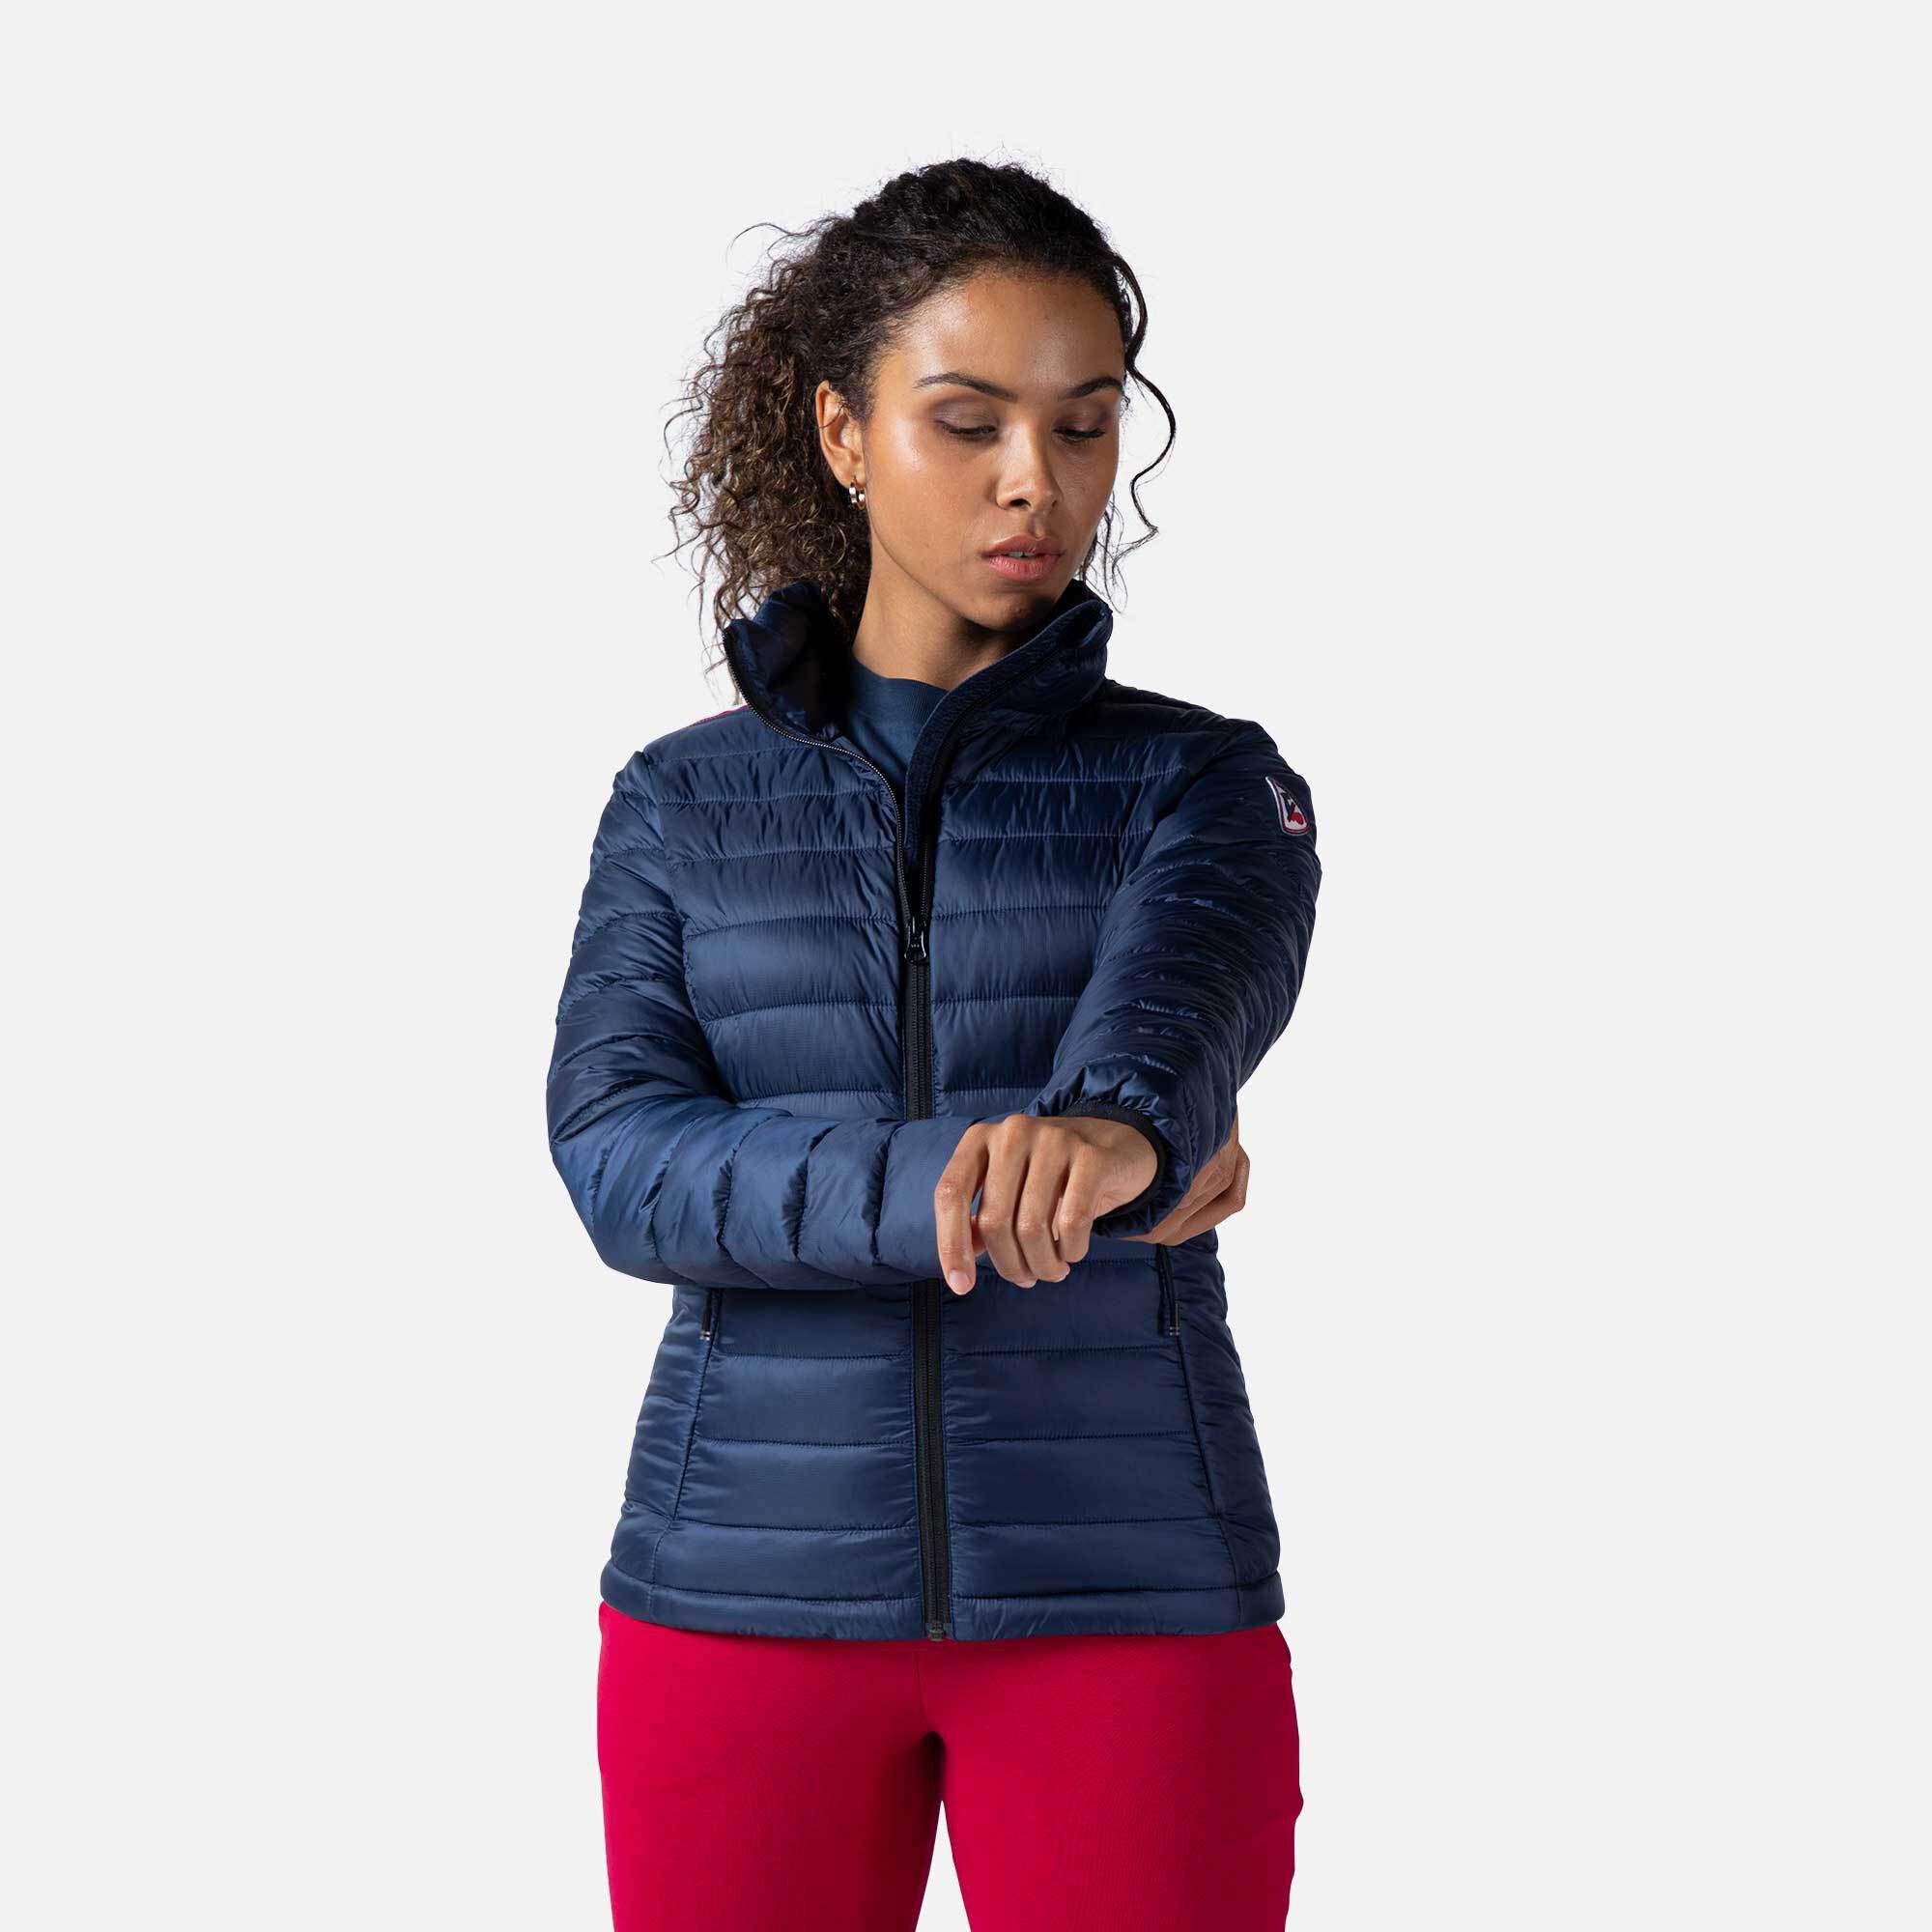 Capa Insulated Jacket, Women's – Gifts for Good